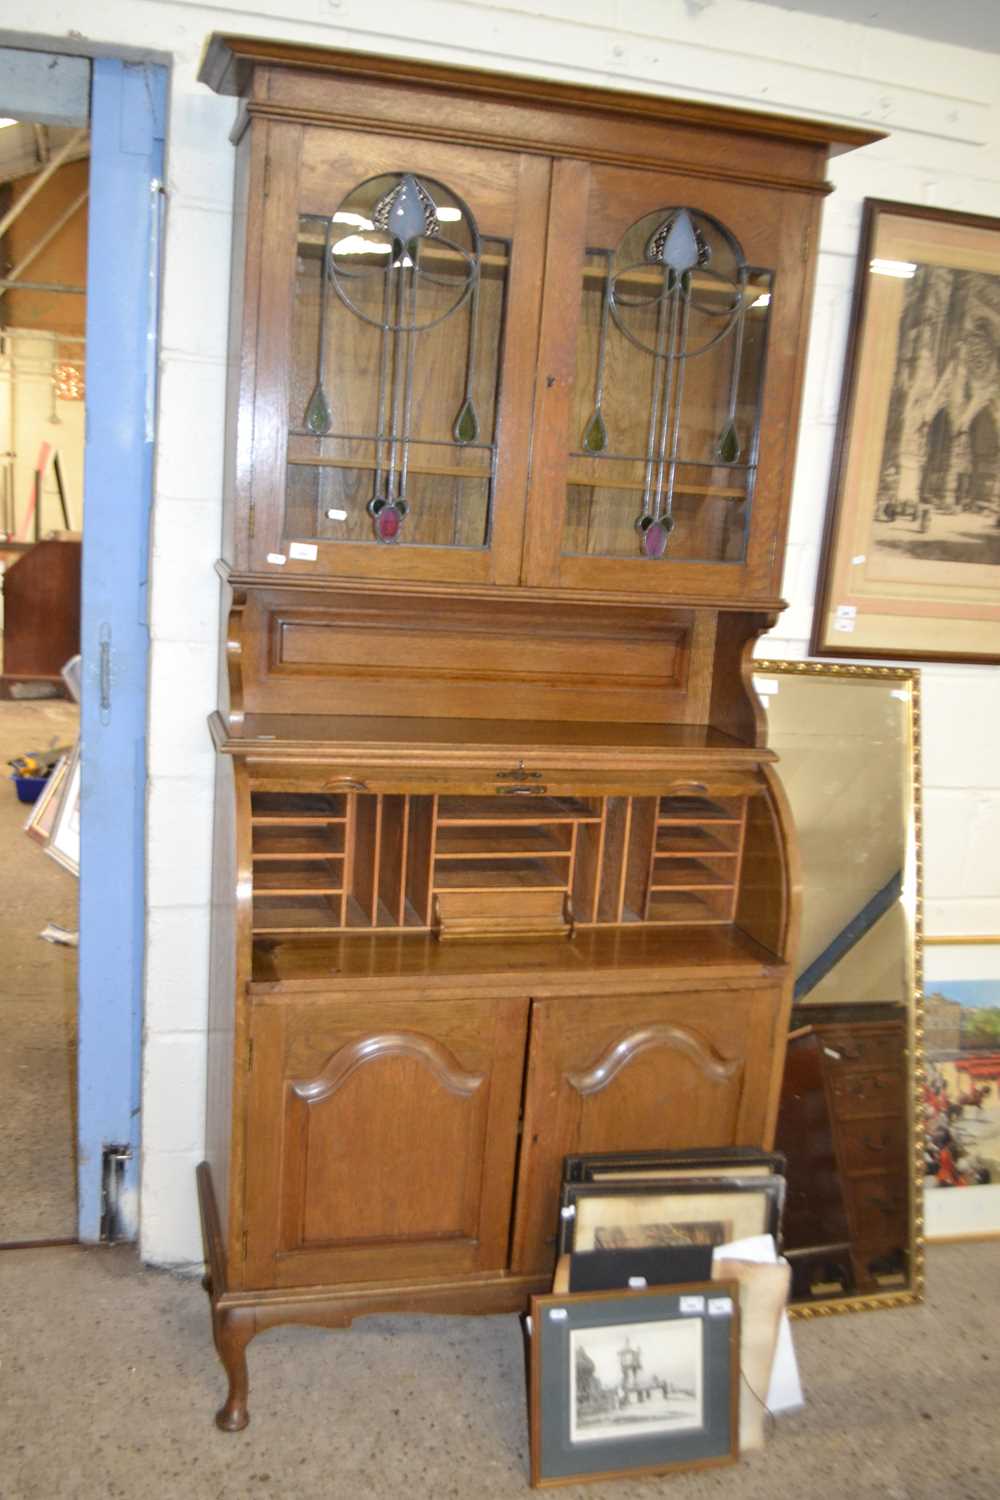 Late 19th/early 19th century oak bureau bookcase cabinet, the top section with Art Nouveau type lead